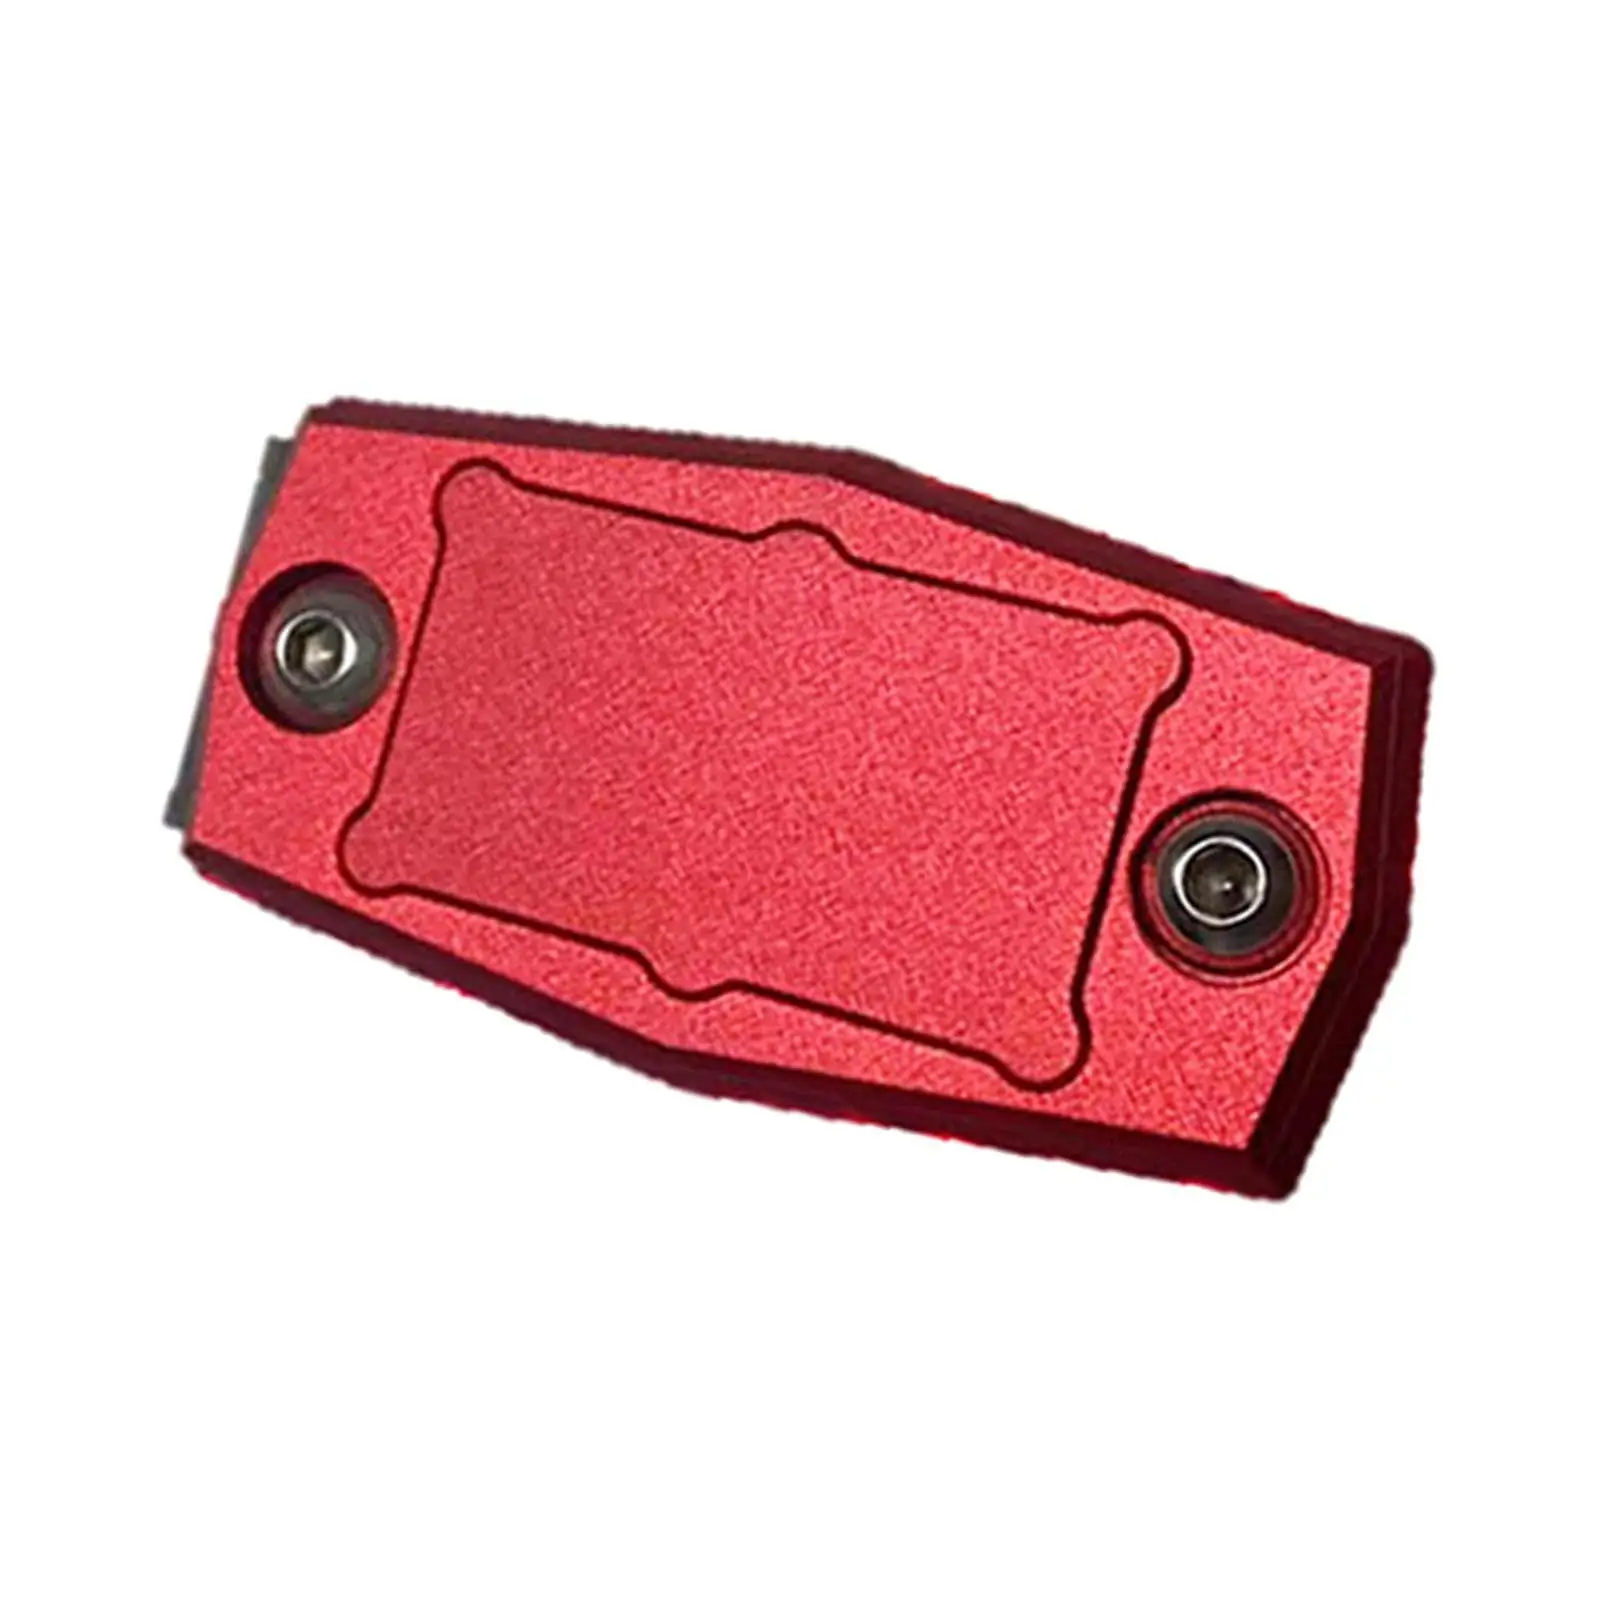 Chalk Belt Clip, Chalk Carrier Clip, Use with Chalk Case, Metal Portable Mini Chalk Fixed Clip